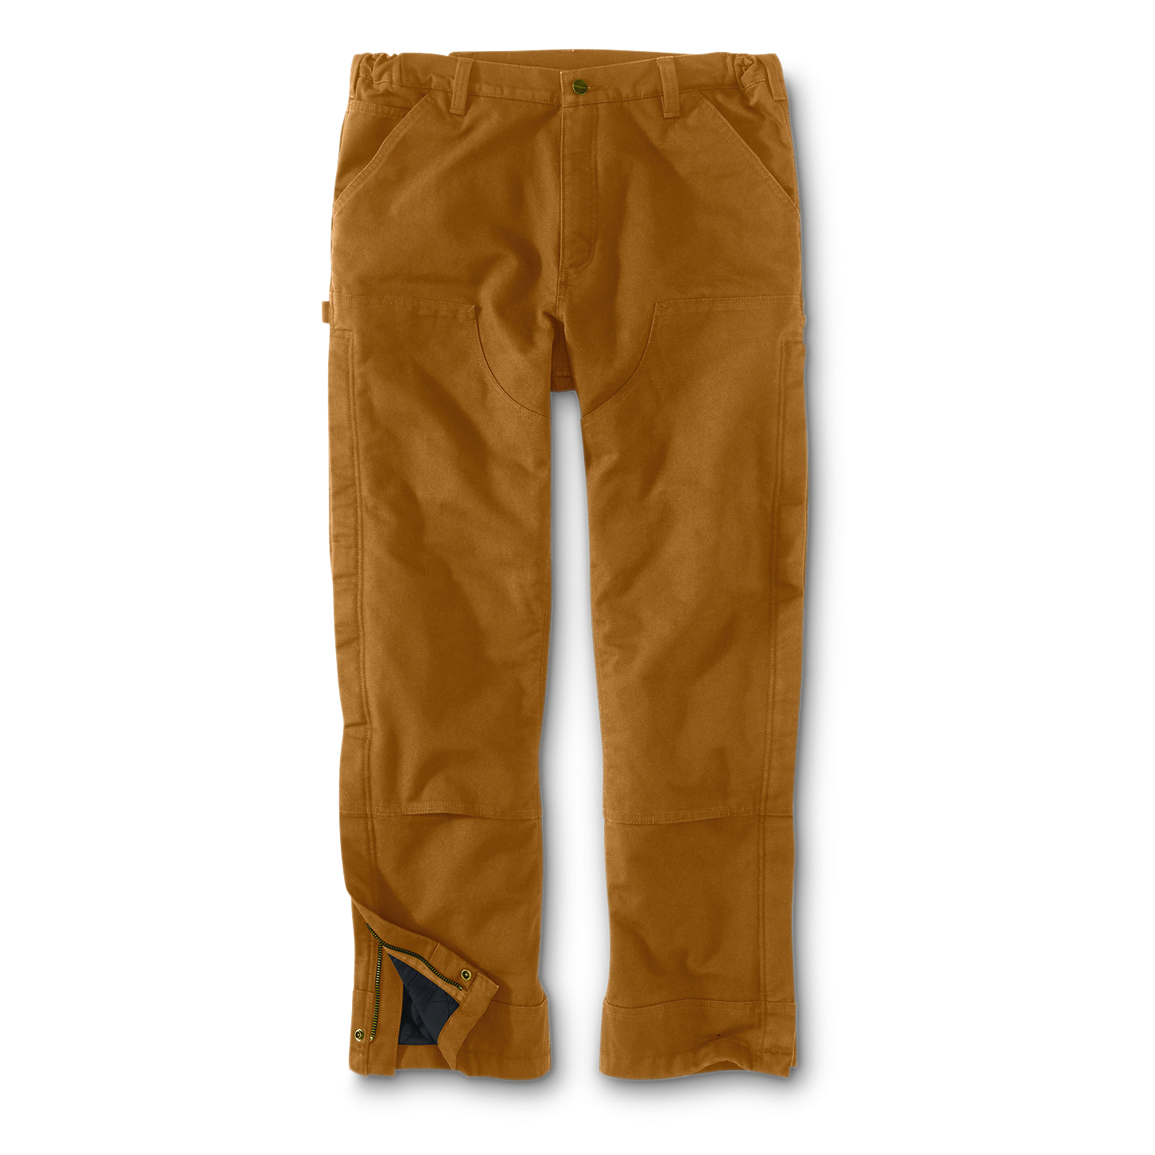 Carhartt Men's Loose Fit Washed Duck Insulated Pants